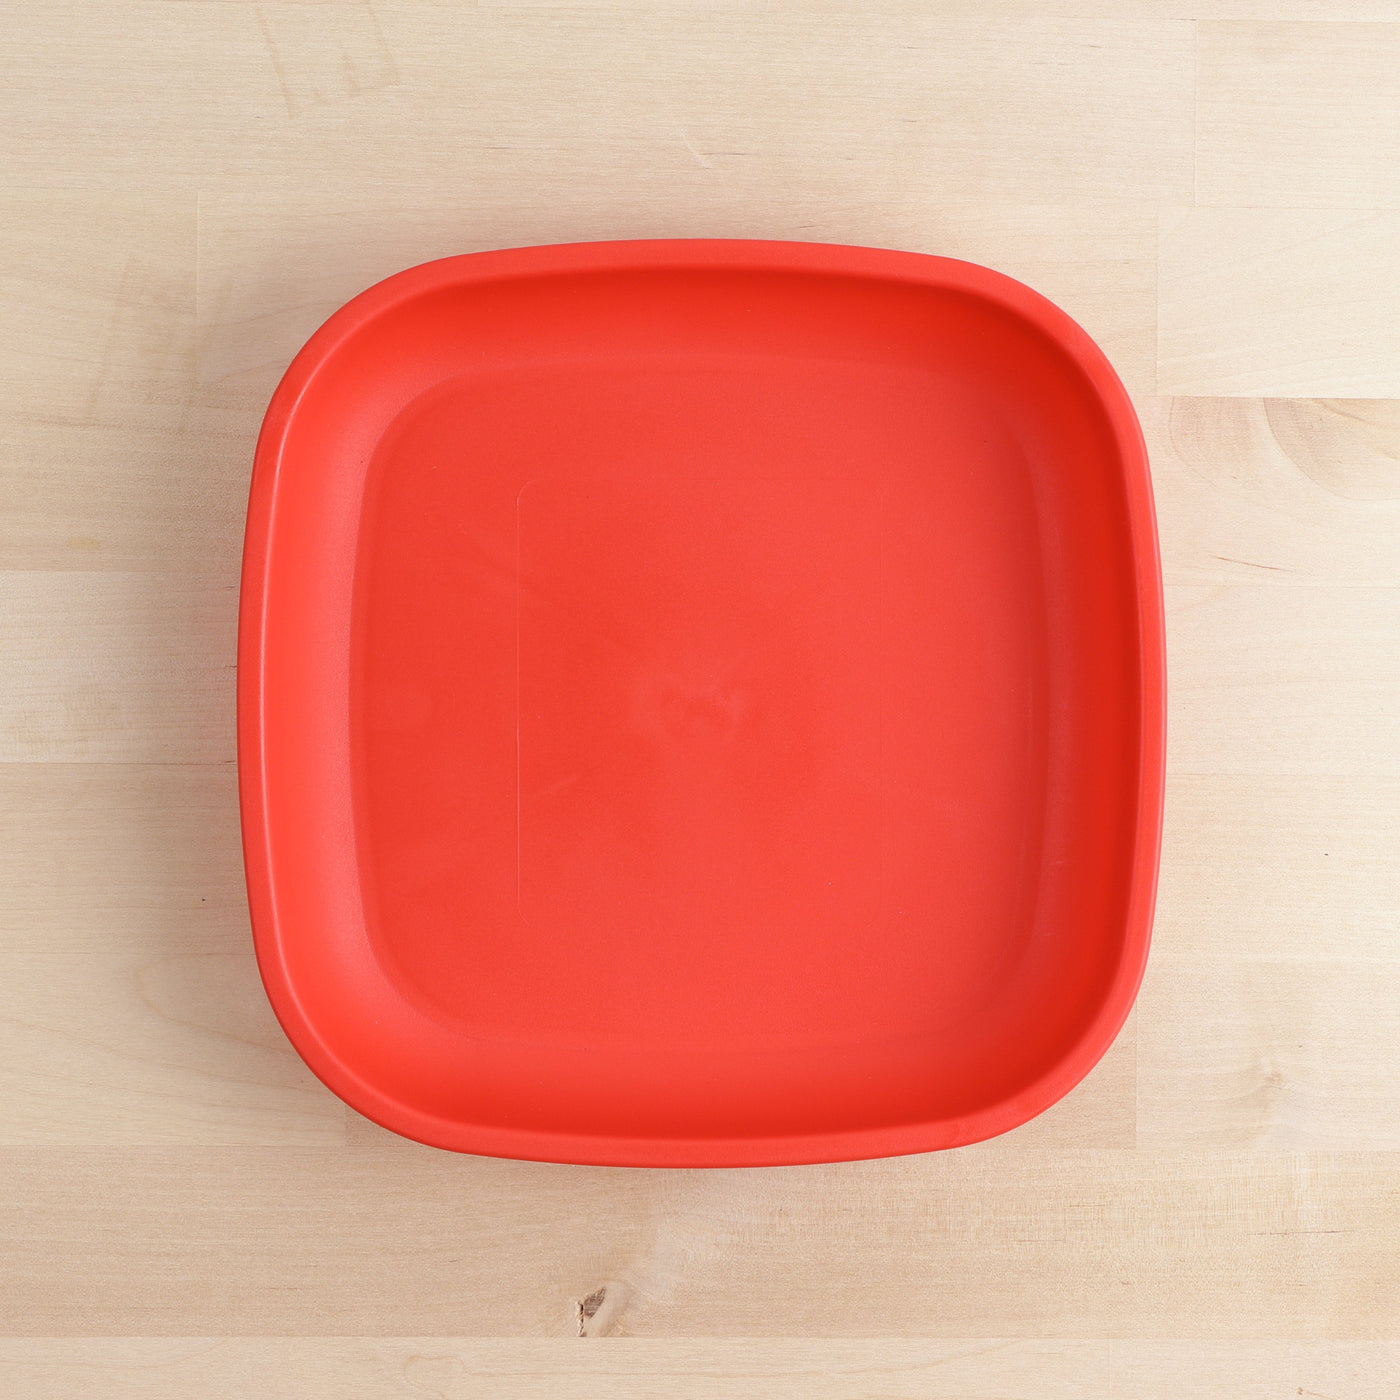 Large Flat Plate Feeding Re-Play Red 